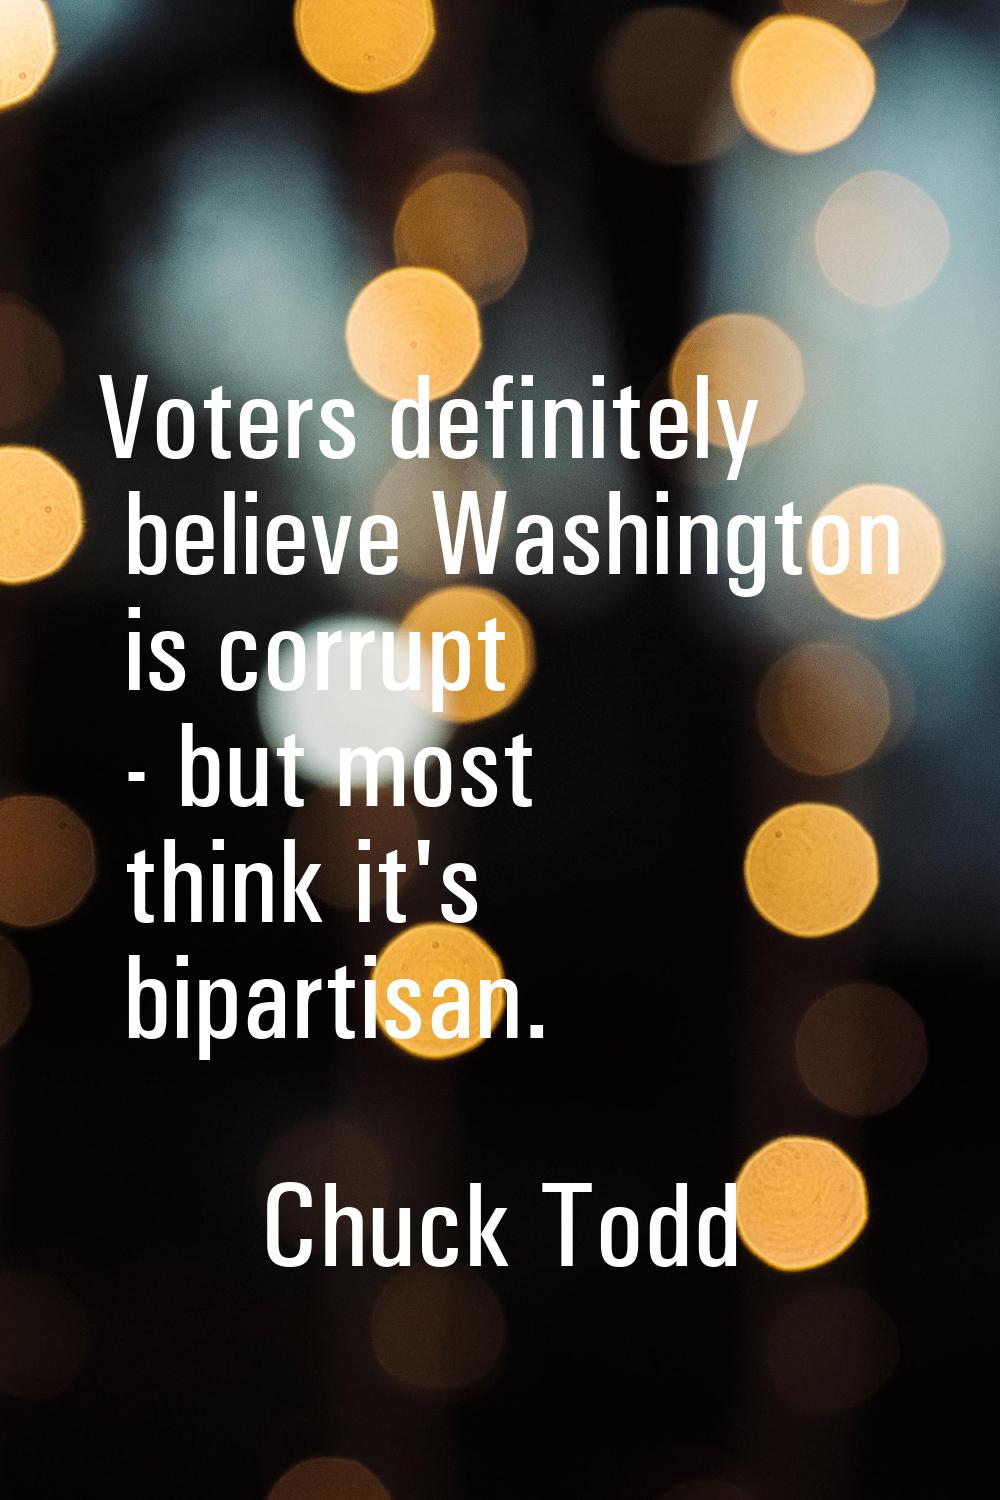 Voters definitely believe Washington is corrupt - but most think it's bipartisan.